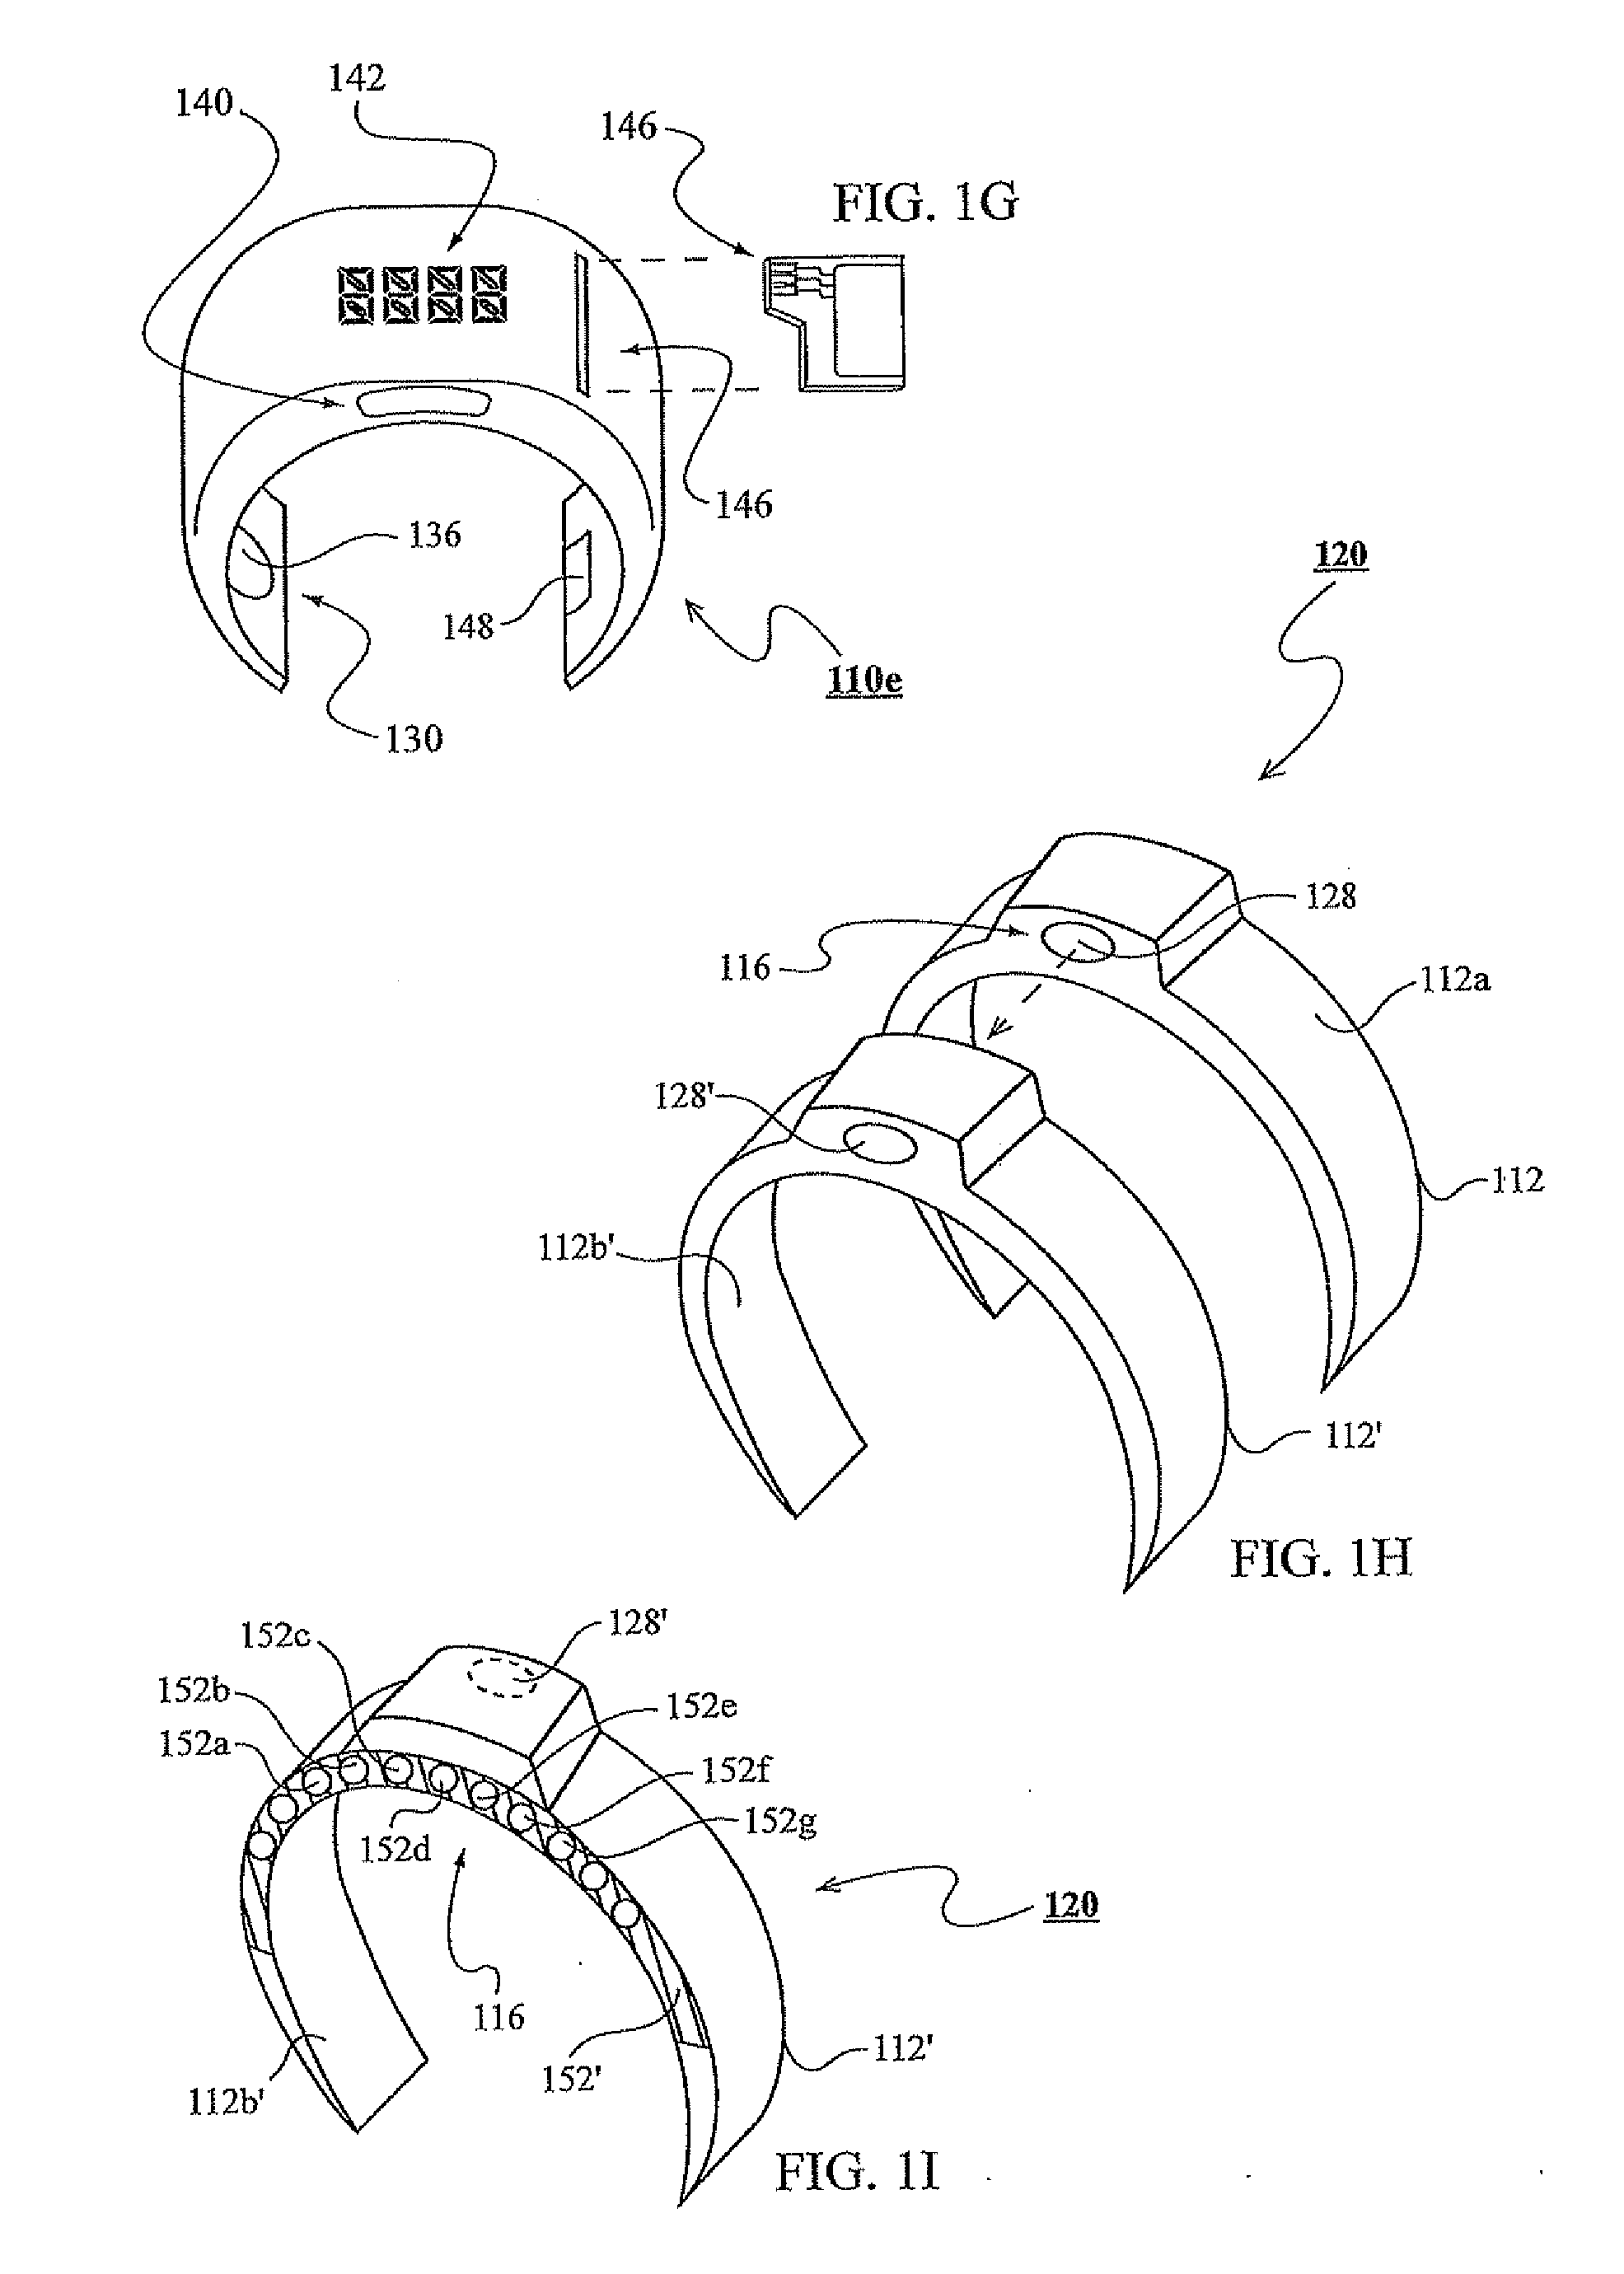 Finger-worn devices and related methods of use